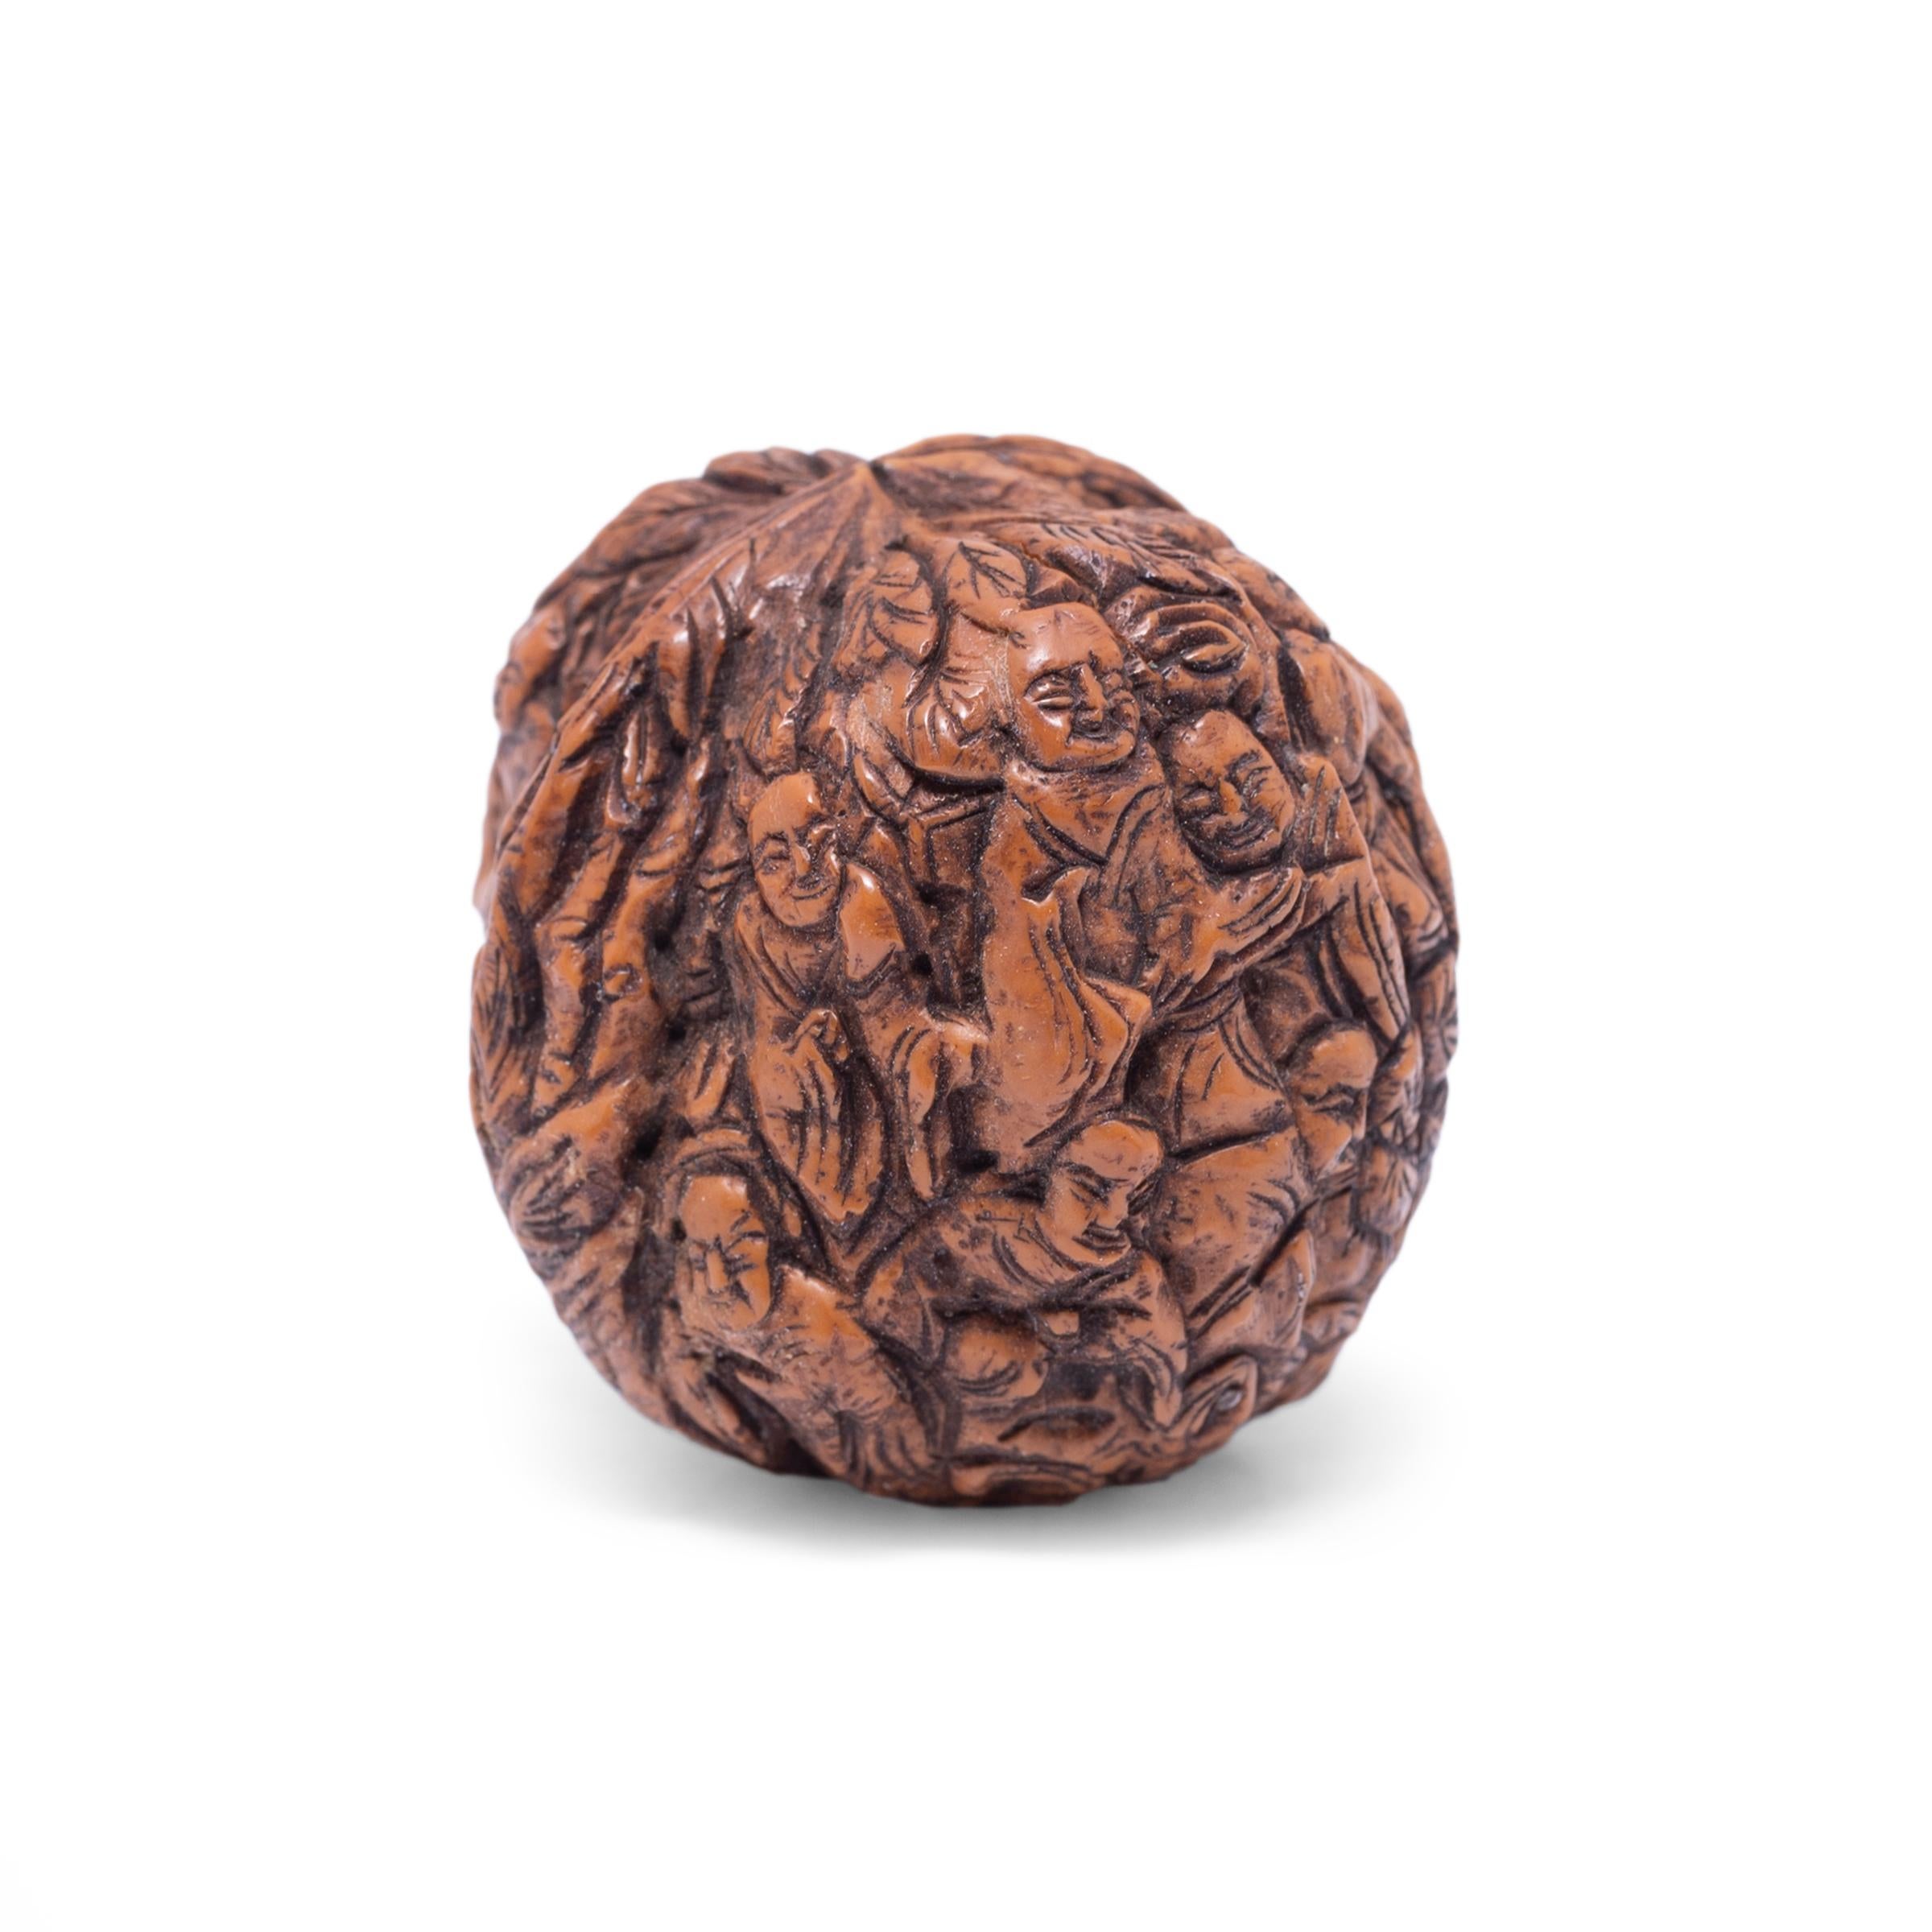 Chinese nut carving is a traditional craft that dates back as far as the Song dynasty (960 to 1279). The practice allowed carvers to showcase their skill by creating intricate works on minute surfaces such as walnuts or peach pits. This polished